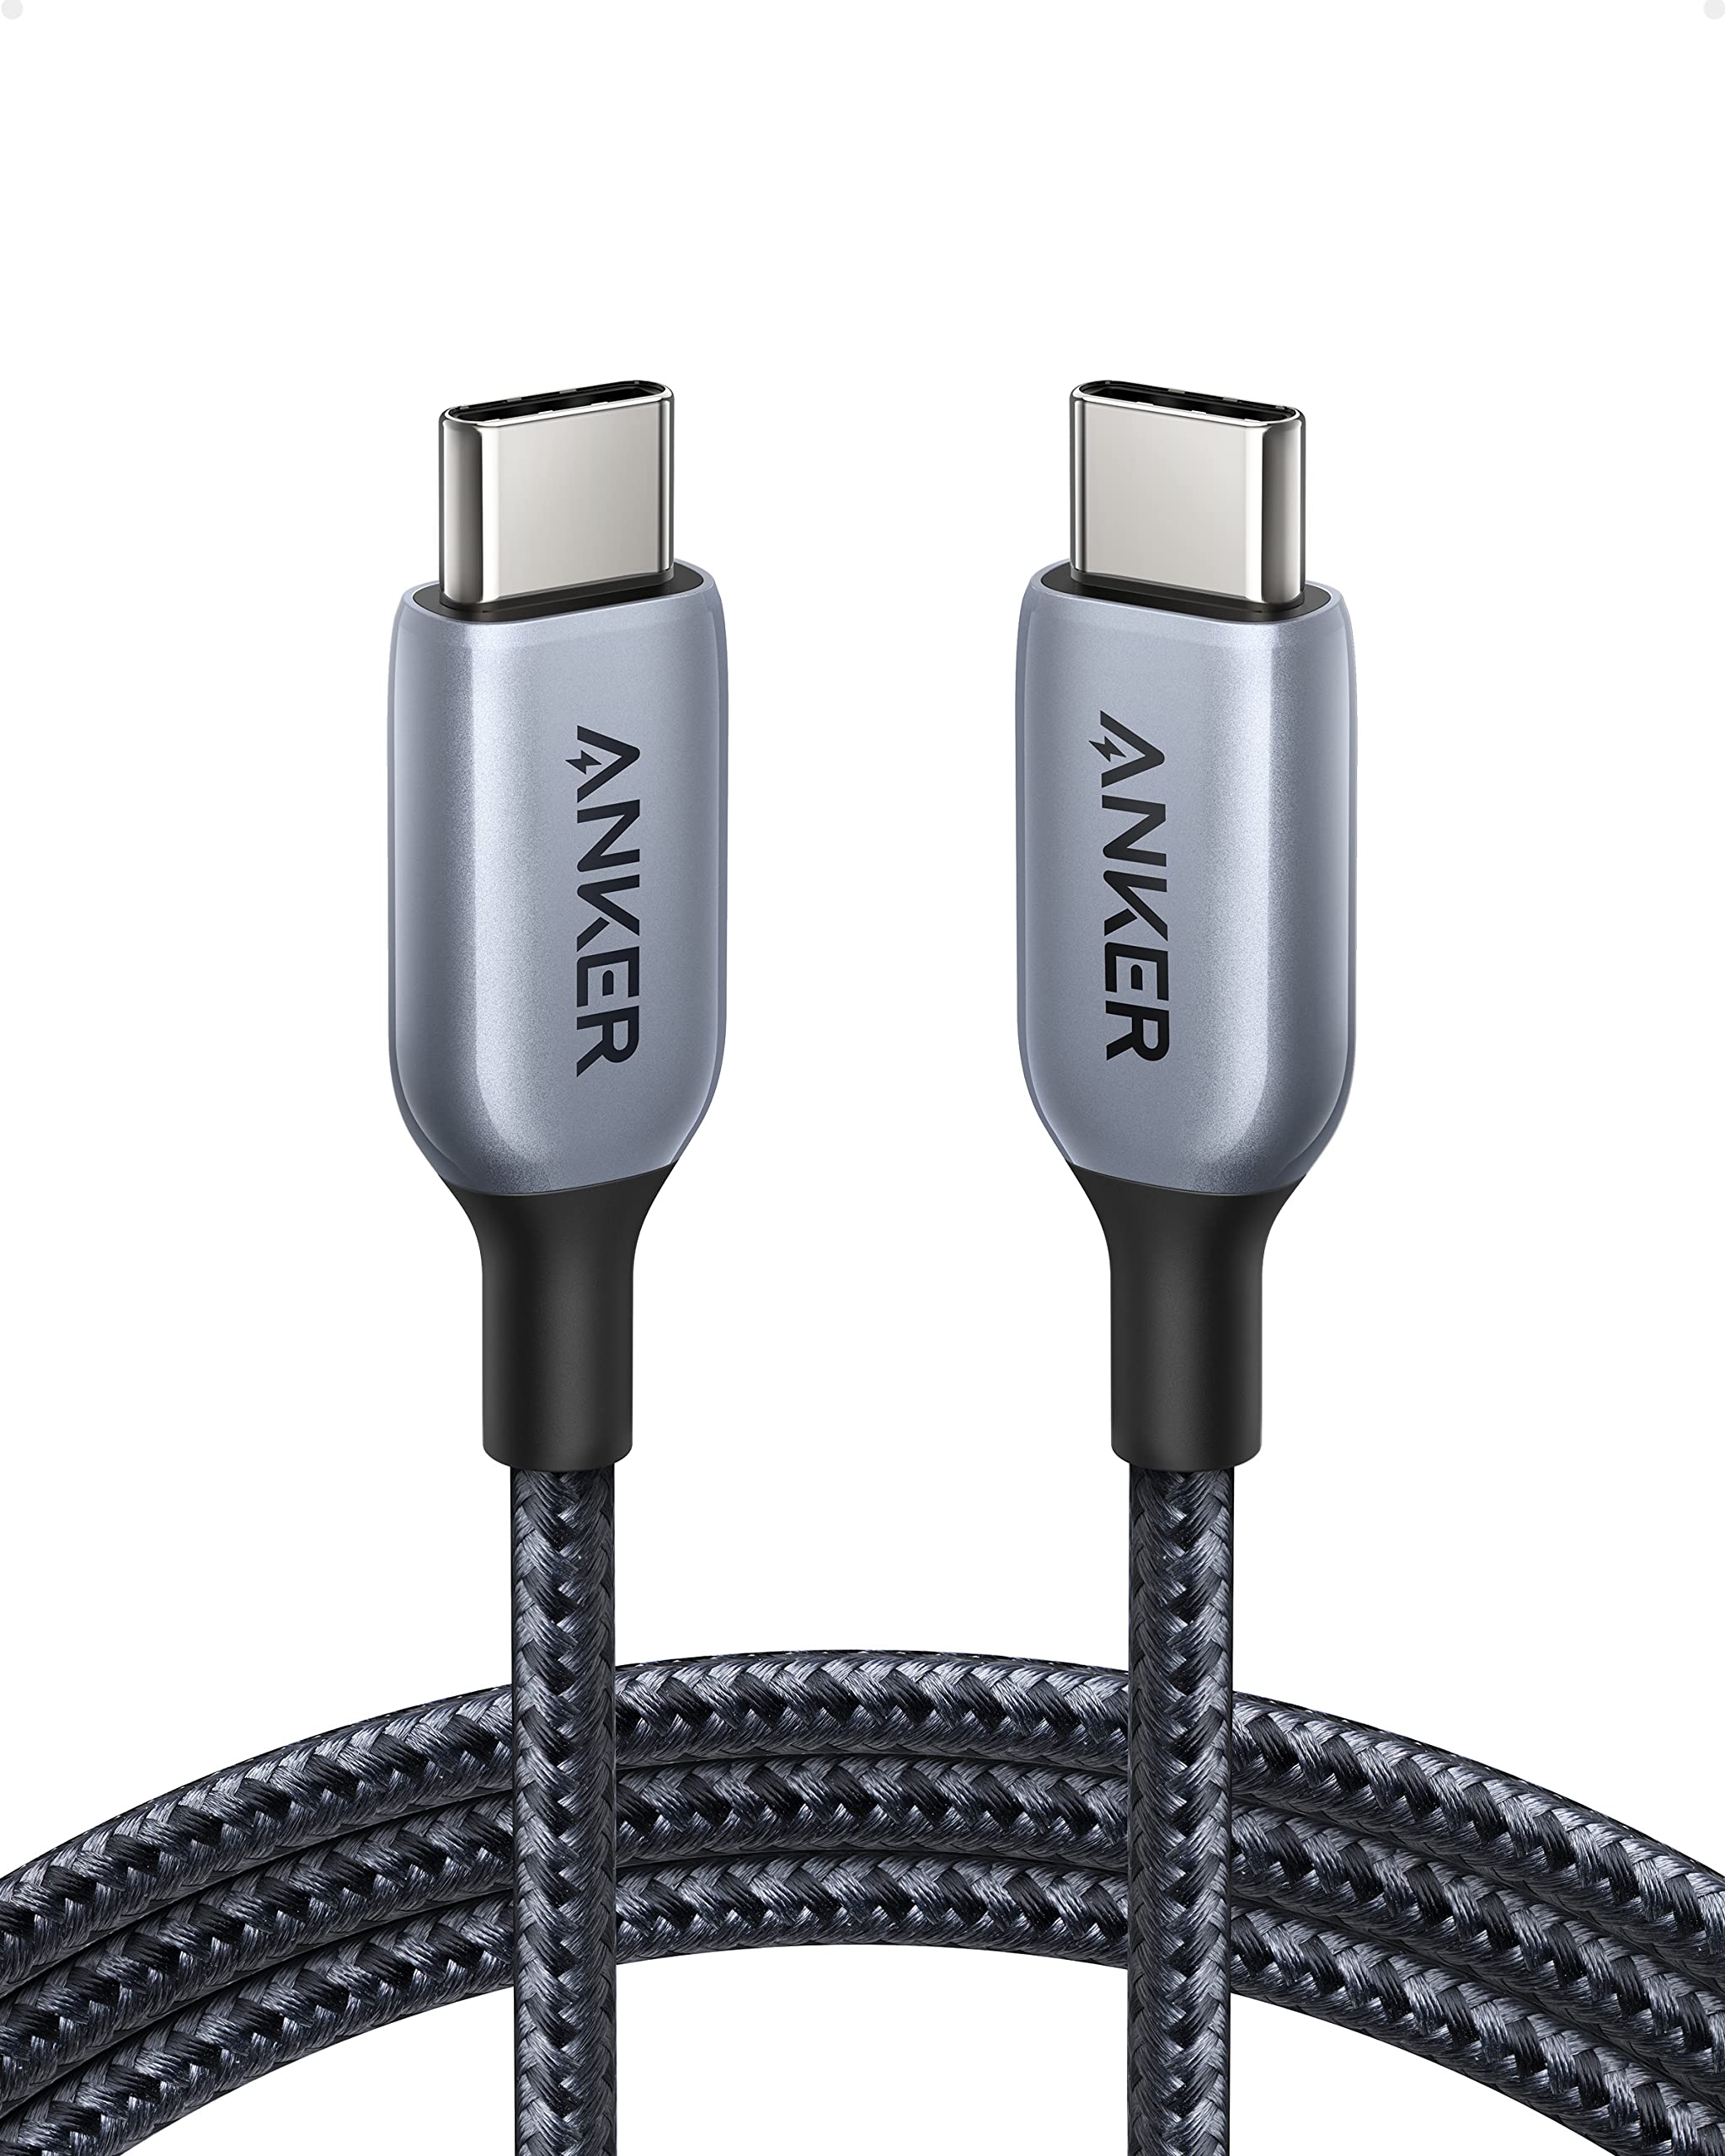 Data Cable Type: Everything You Need to Know Before Buying - Anker US